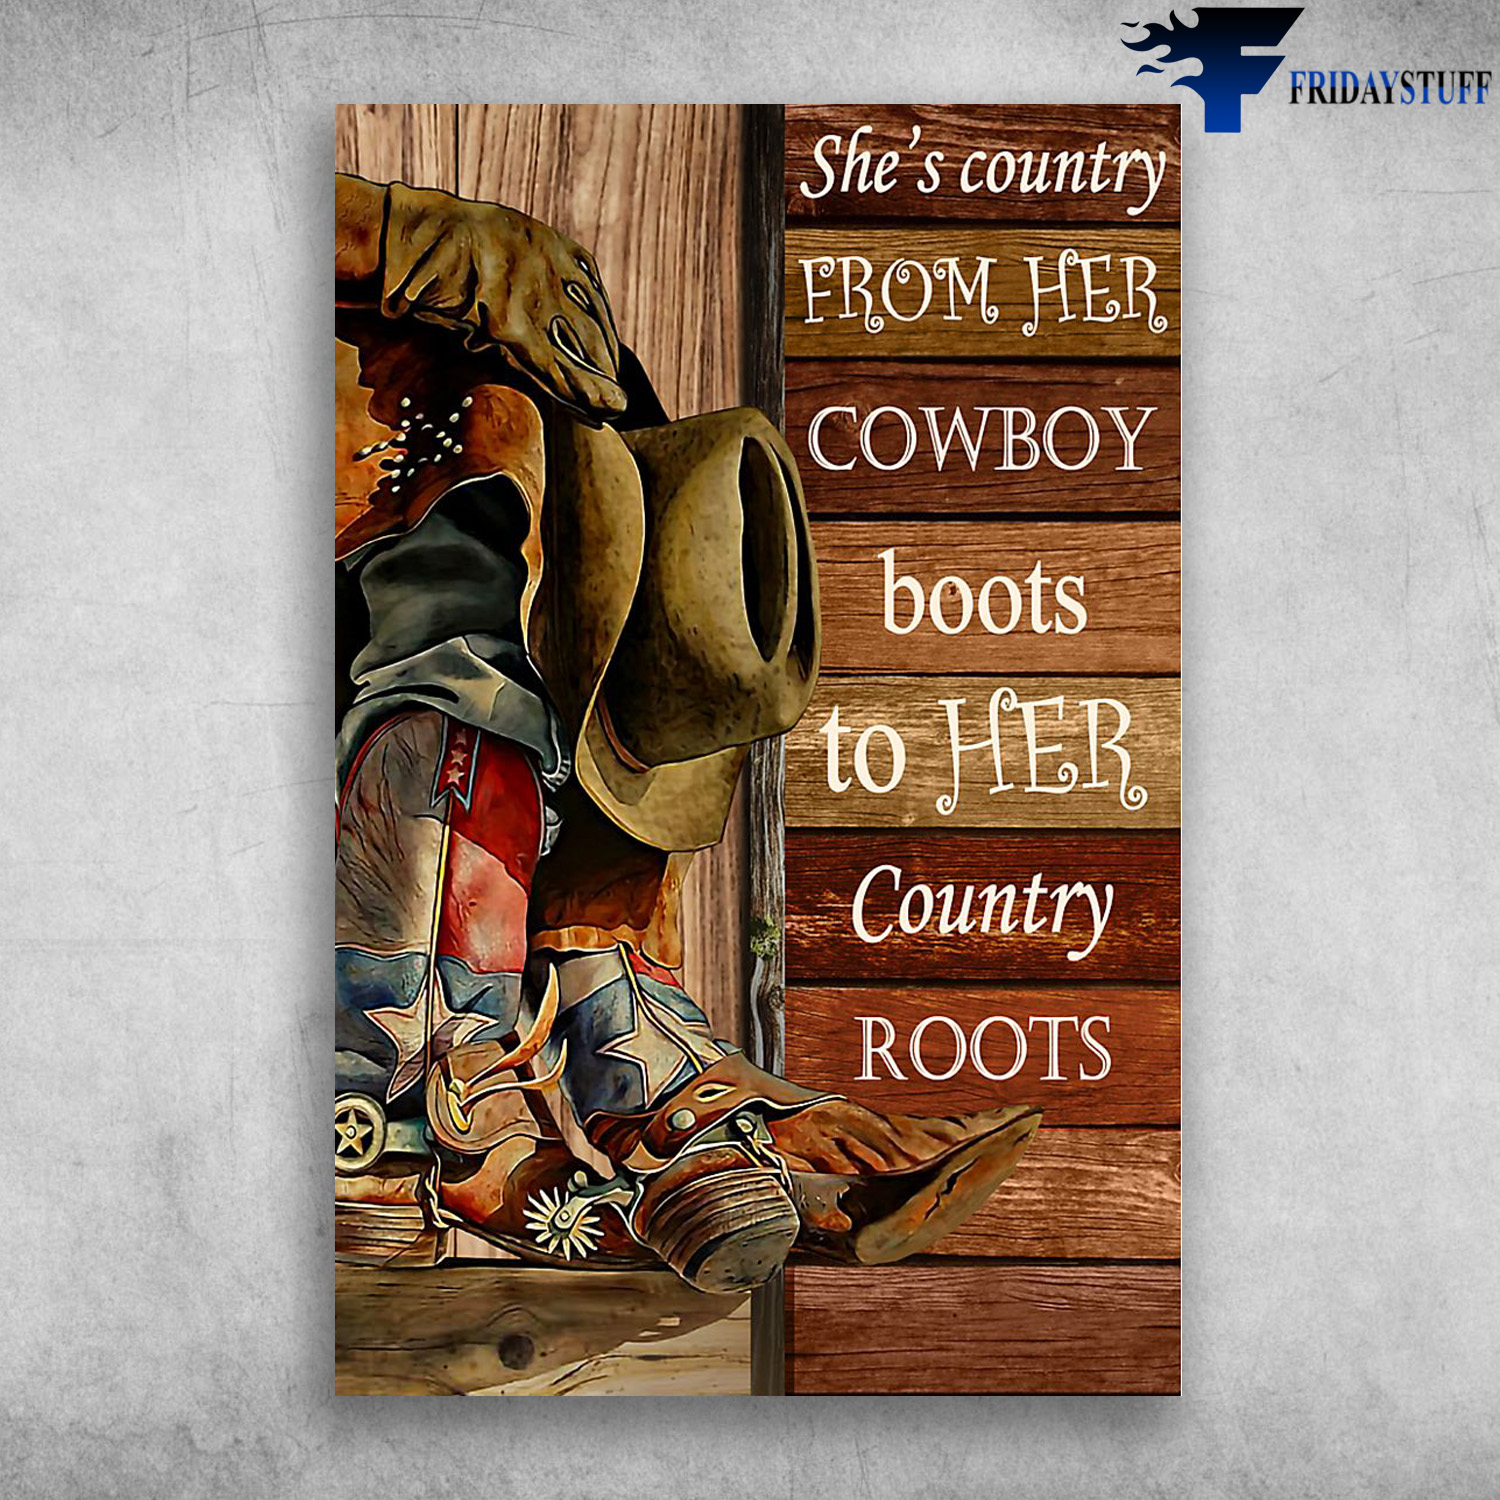 Cowboy Outfit - She's Country From Her Cowboy Boots To Her Country Roots